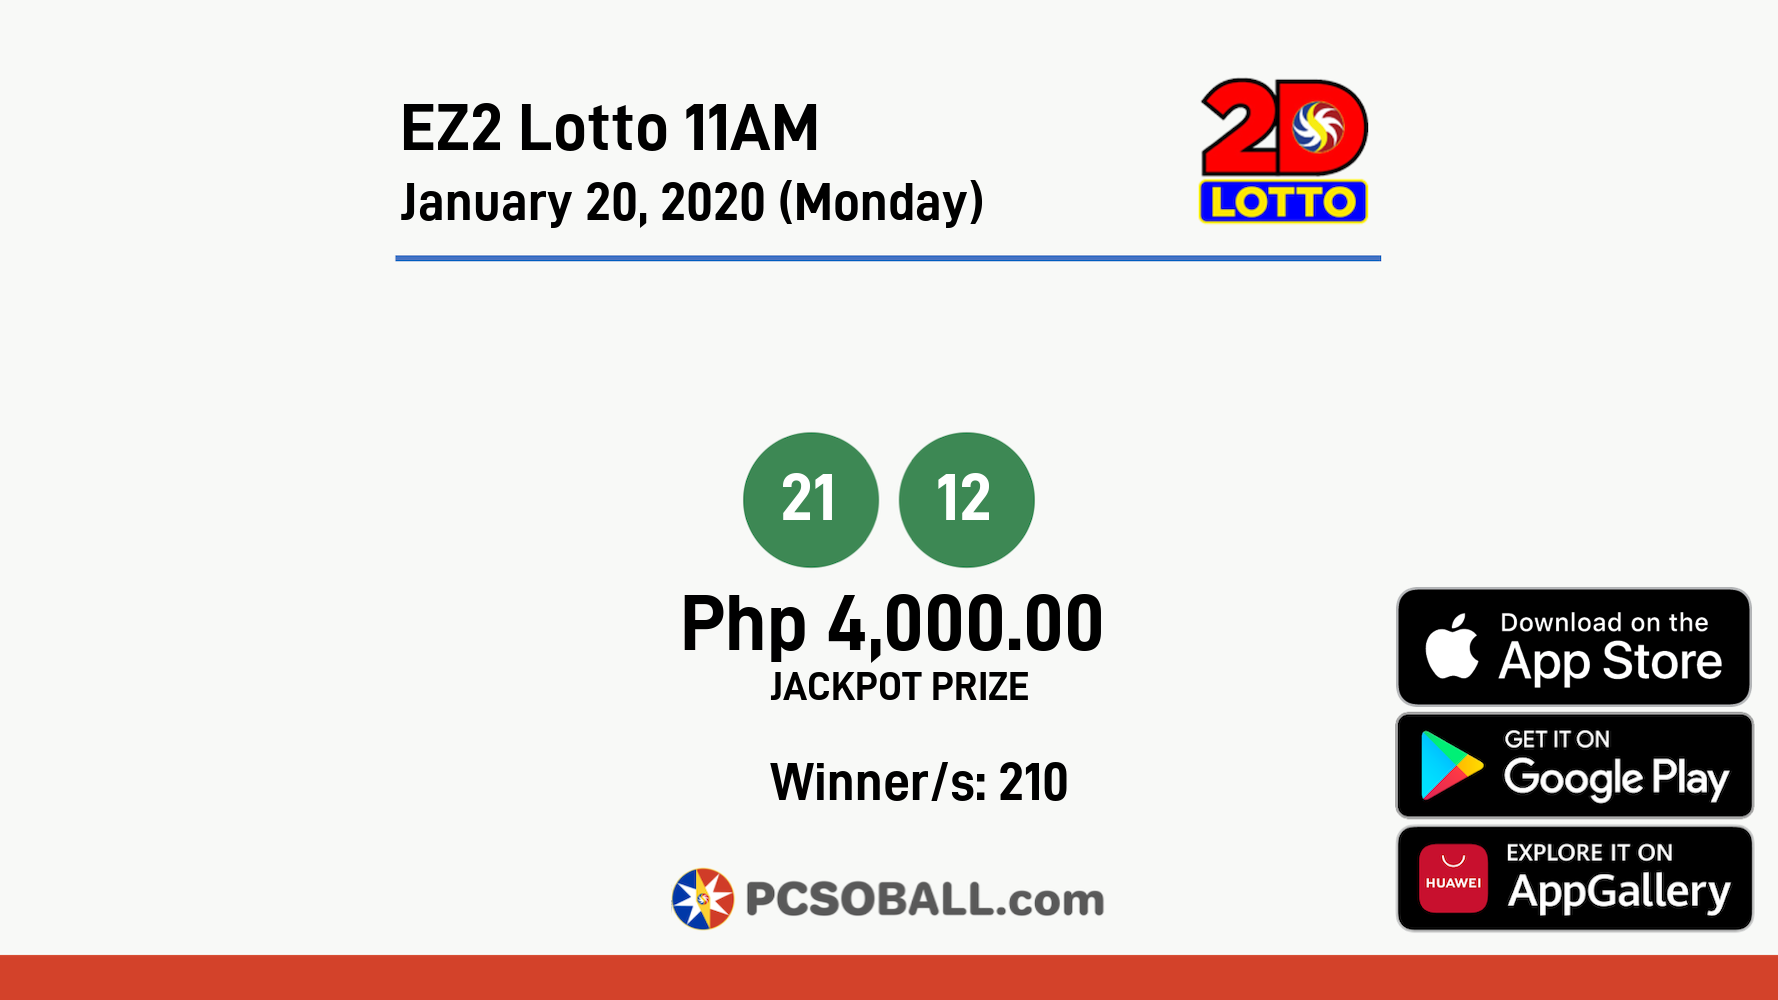 EZ2 Lotto 11AM January 20, 2020 (Monday) Result